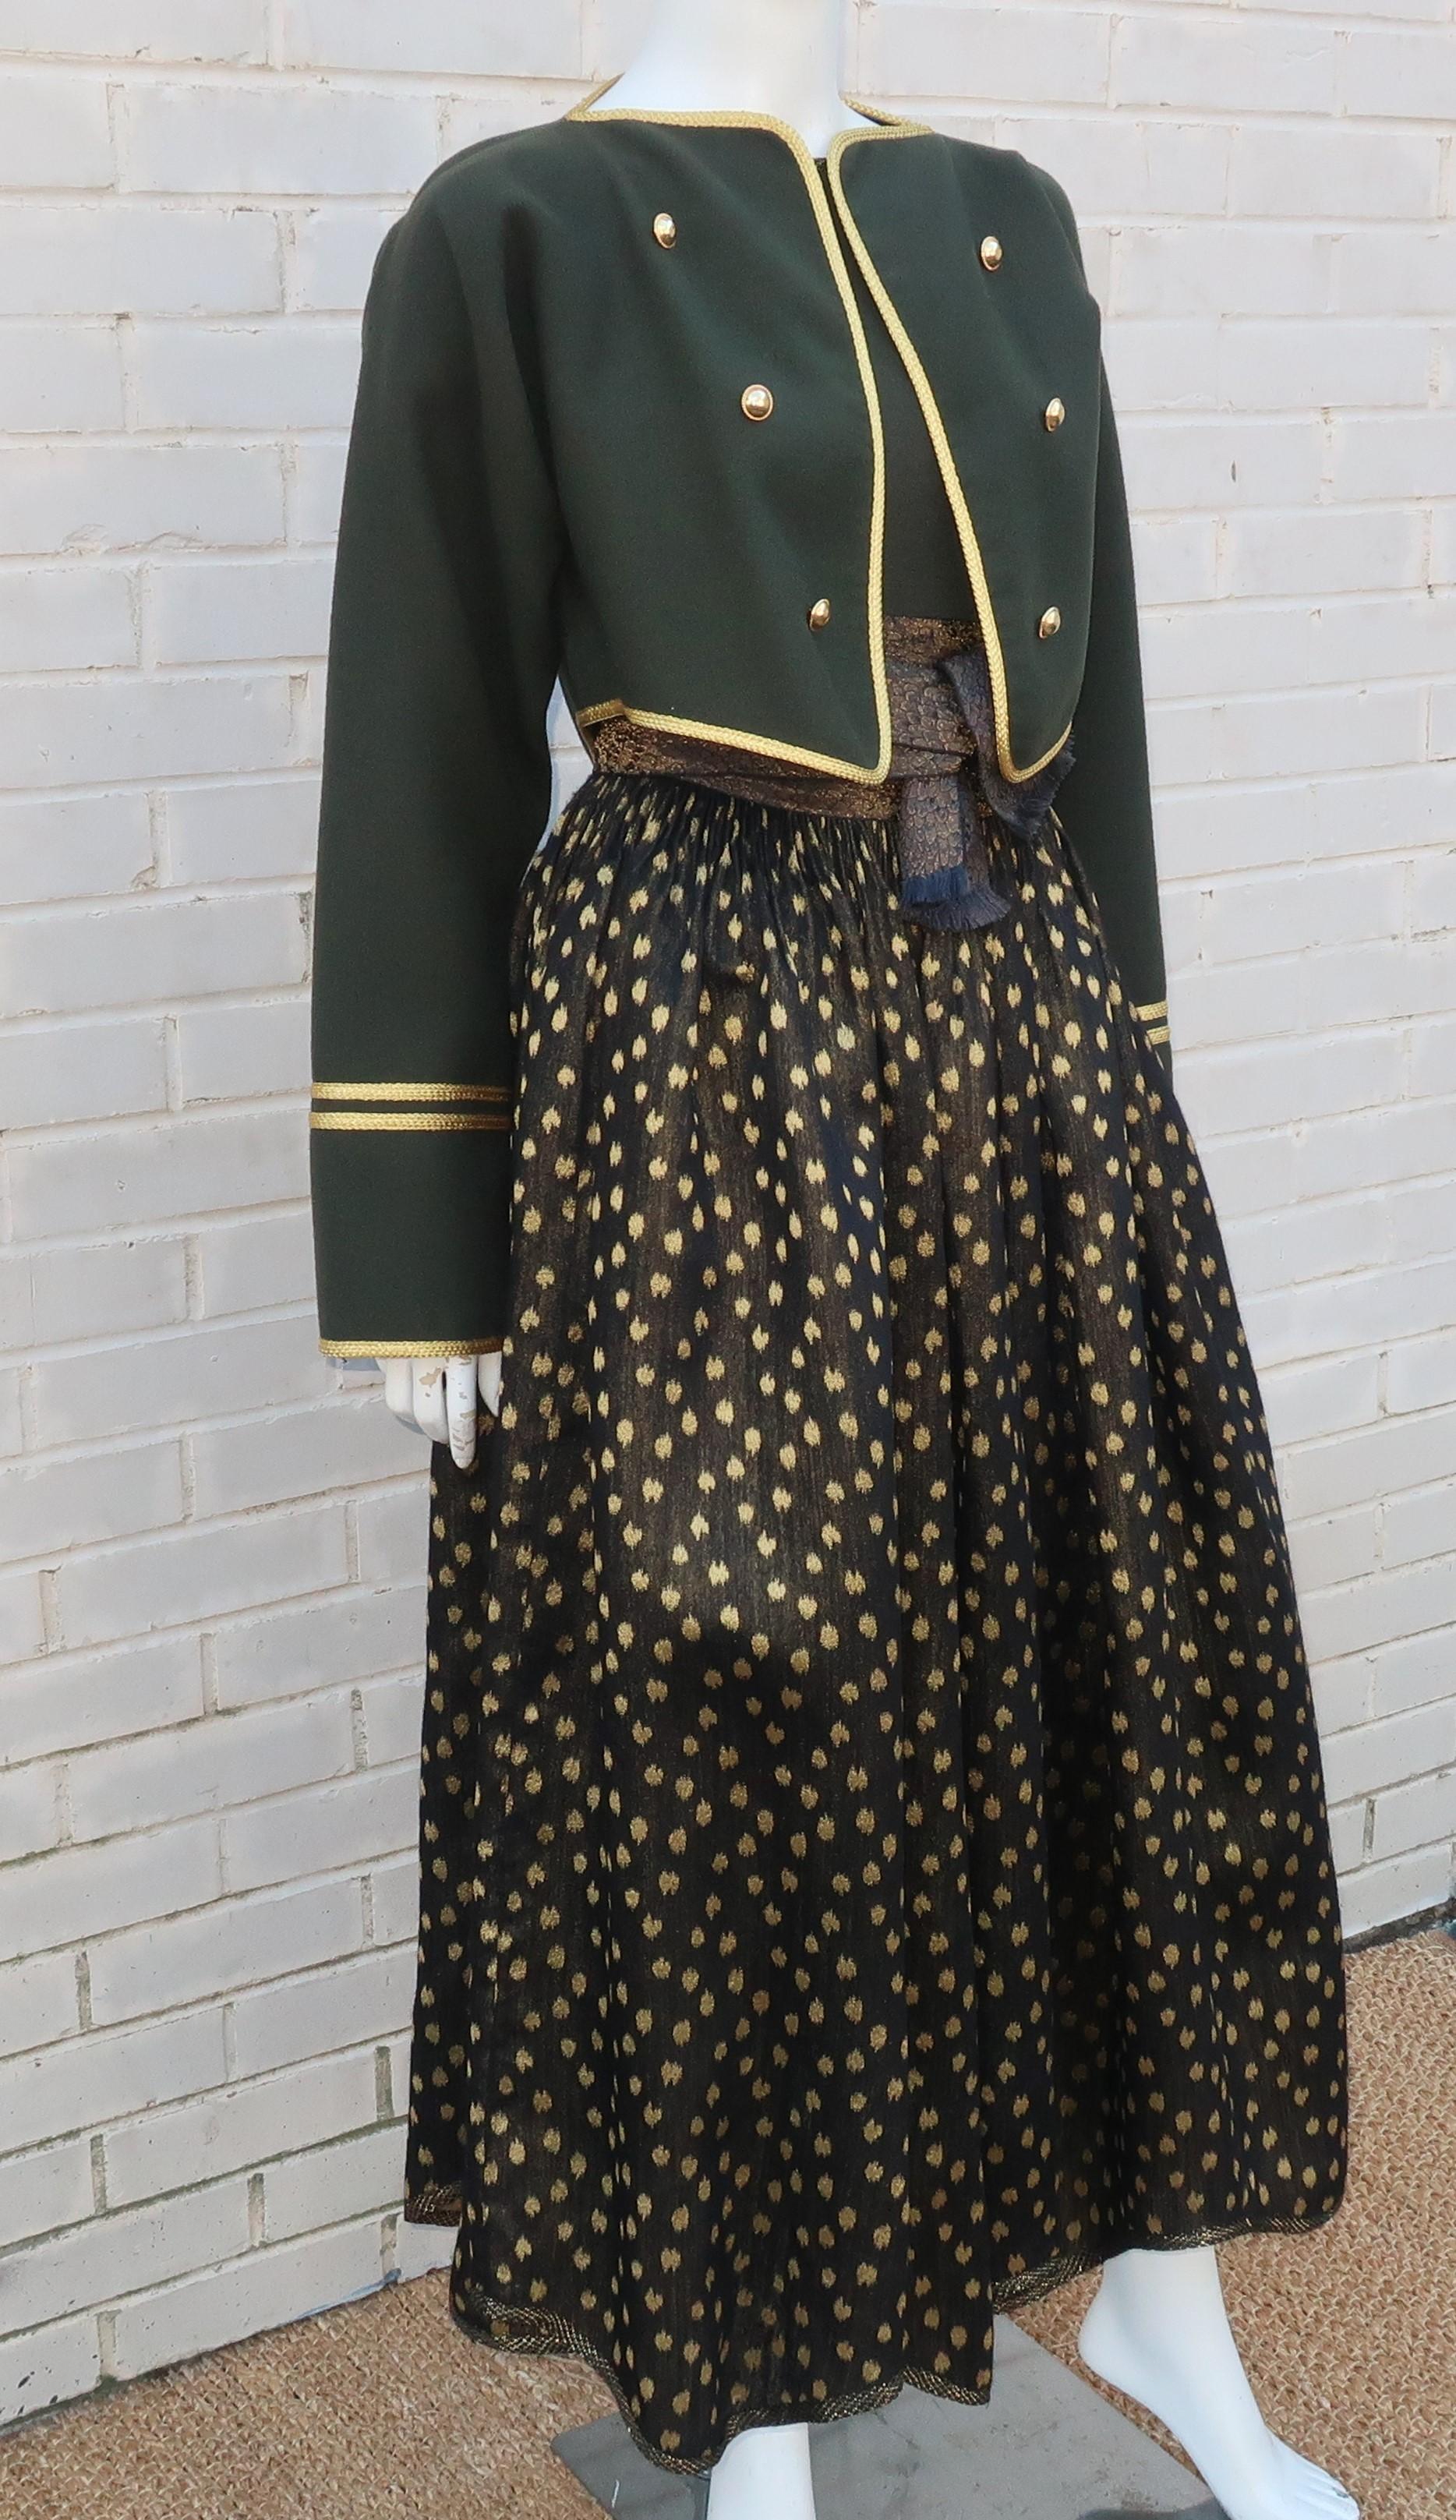 A 1980's Geoffrey Beene five piece ensemble consisting of top, skirt, petticoat, jacket and sash belt ... the works!  The loden green wool cropped jacket has a military inspiration with an open front flanked by gold dome buttons and a heavy braid